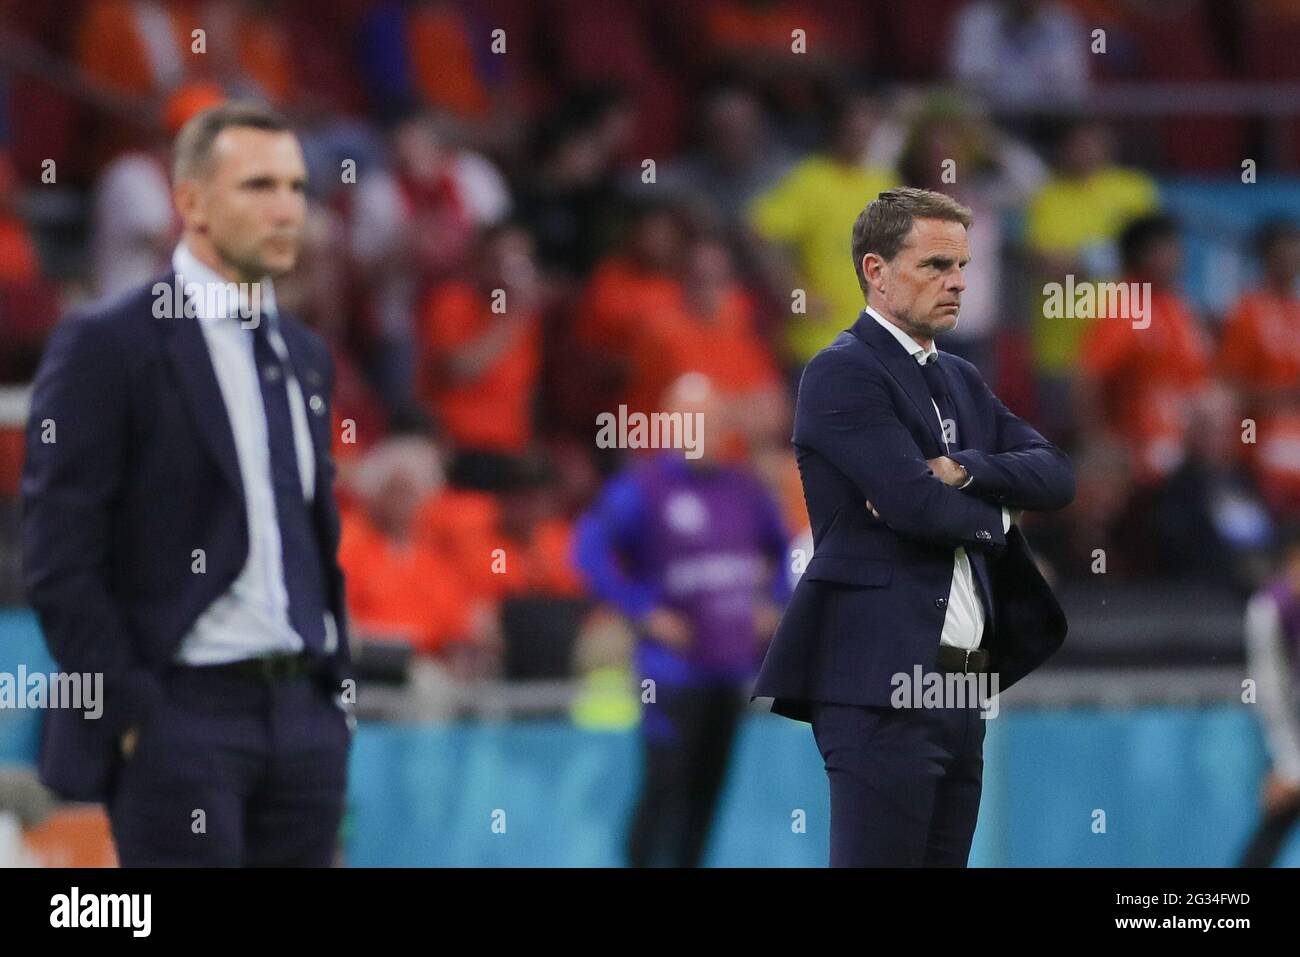 Amsterdam, Netherlands. 13th June, 2021. Coach Frank de Boer (R) of the Netherlands and Coach Andriy Shevchenko of Ukraine watch the UEFA Euro 2020 Championship Group C match between the Netherlands and Ukraine in Amsterdam, the Netherlands, June 13, 2021. Credit: Zheng Huansong/Xinhua/Alamy Live News Stock Photo